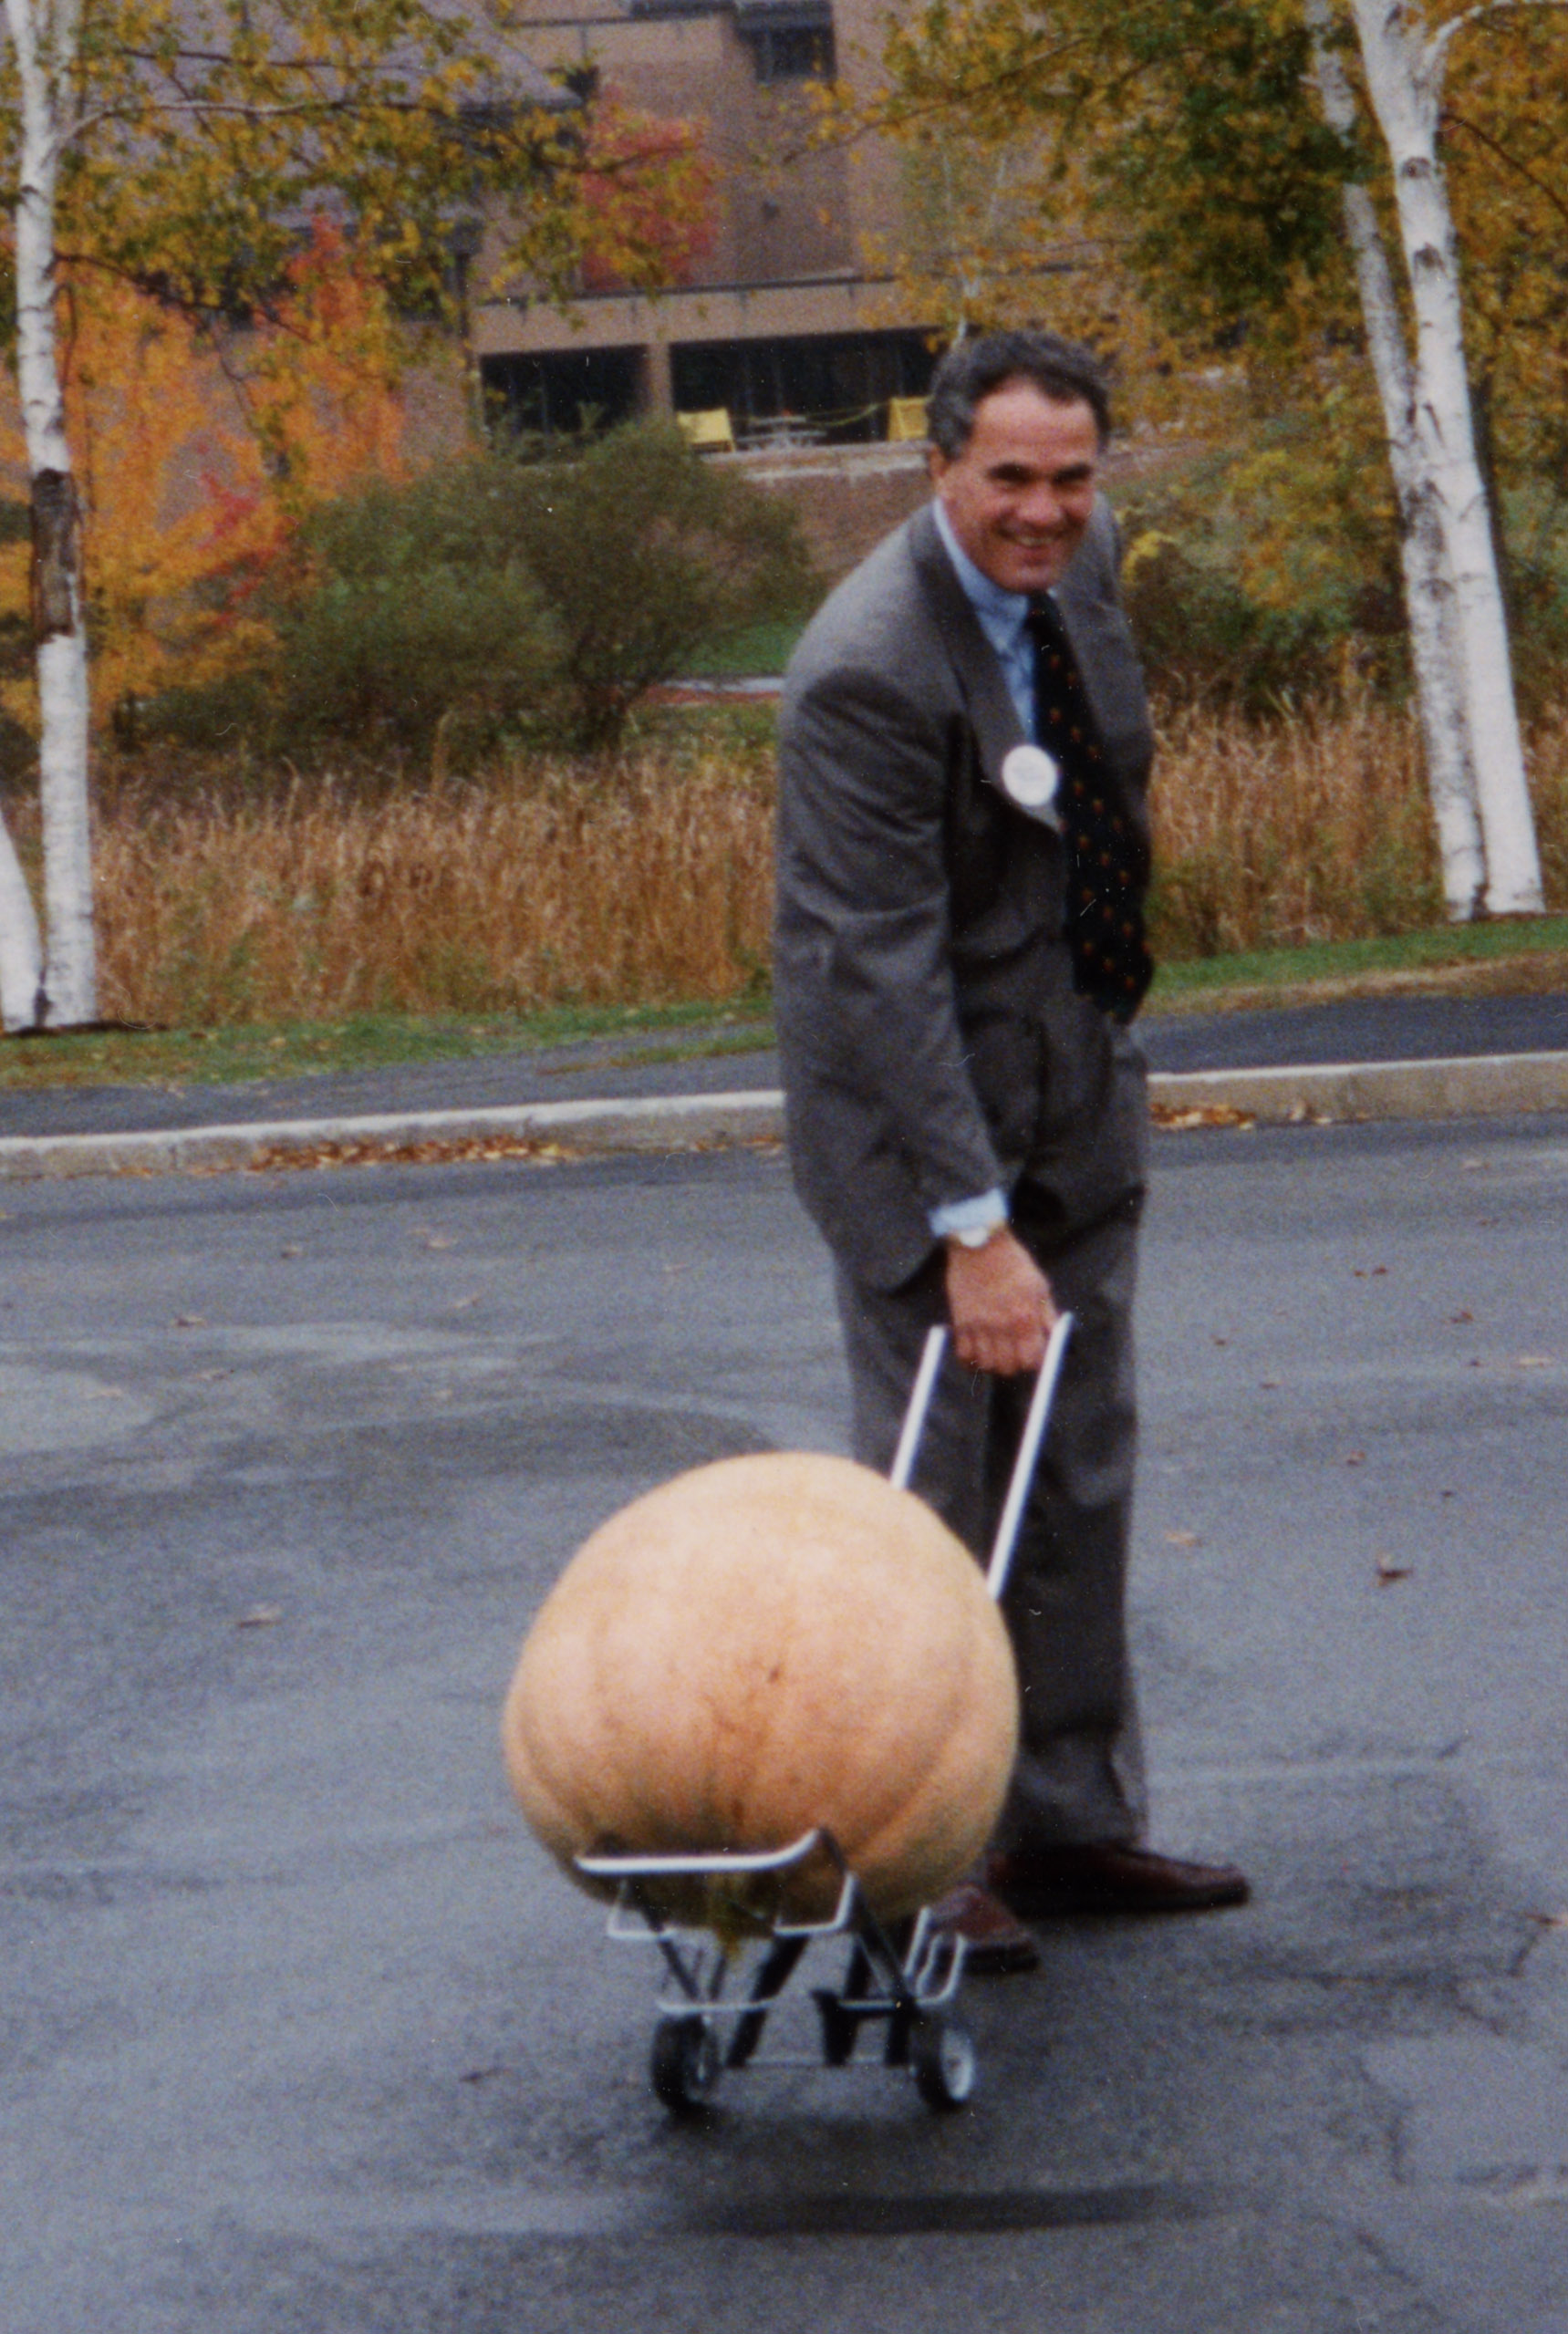 Depiction of Jay Healy with a pumpkin, Greenfield, Mass., 1998